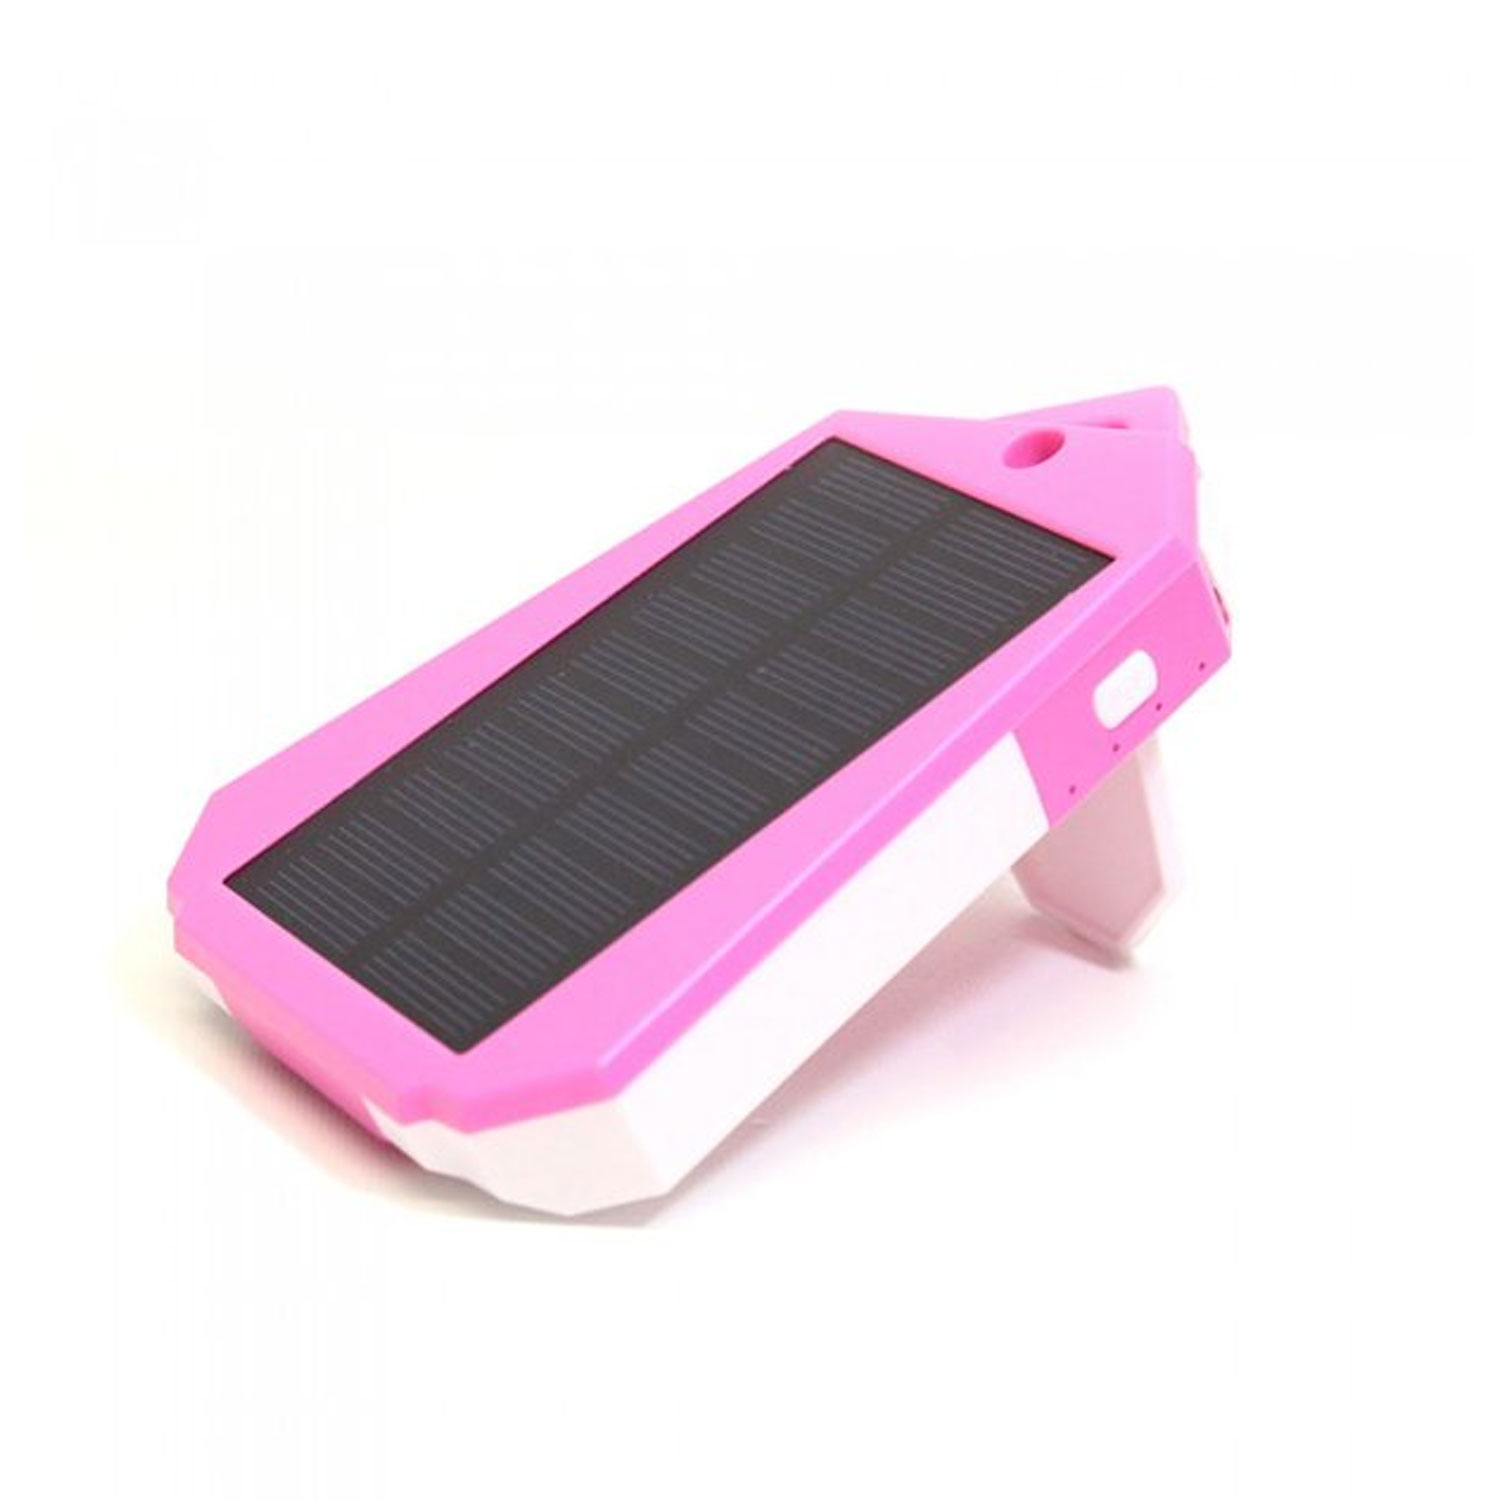 Solar Charger - Pink